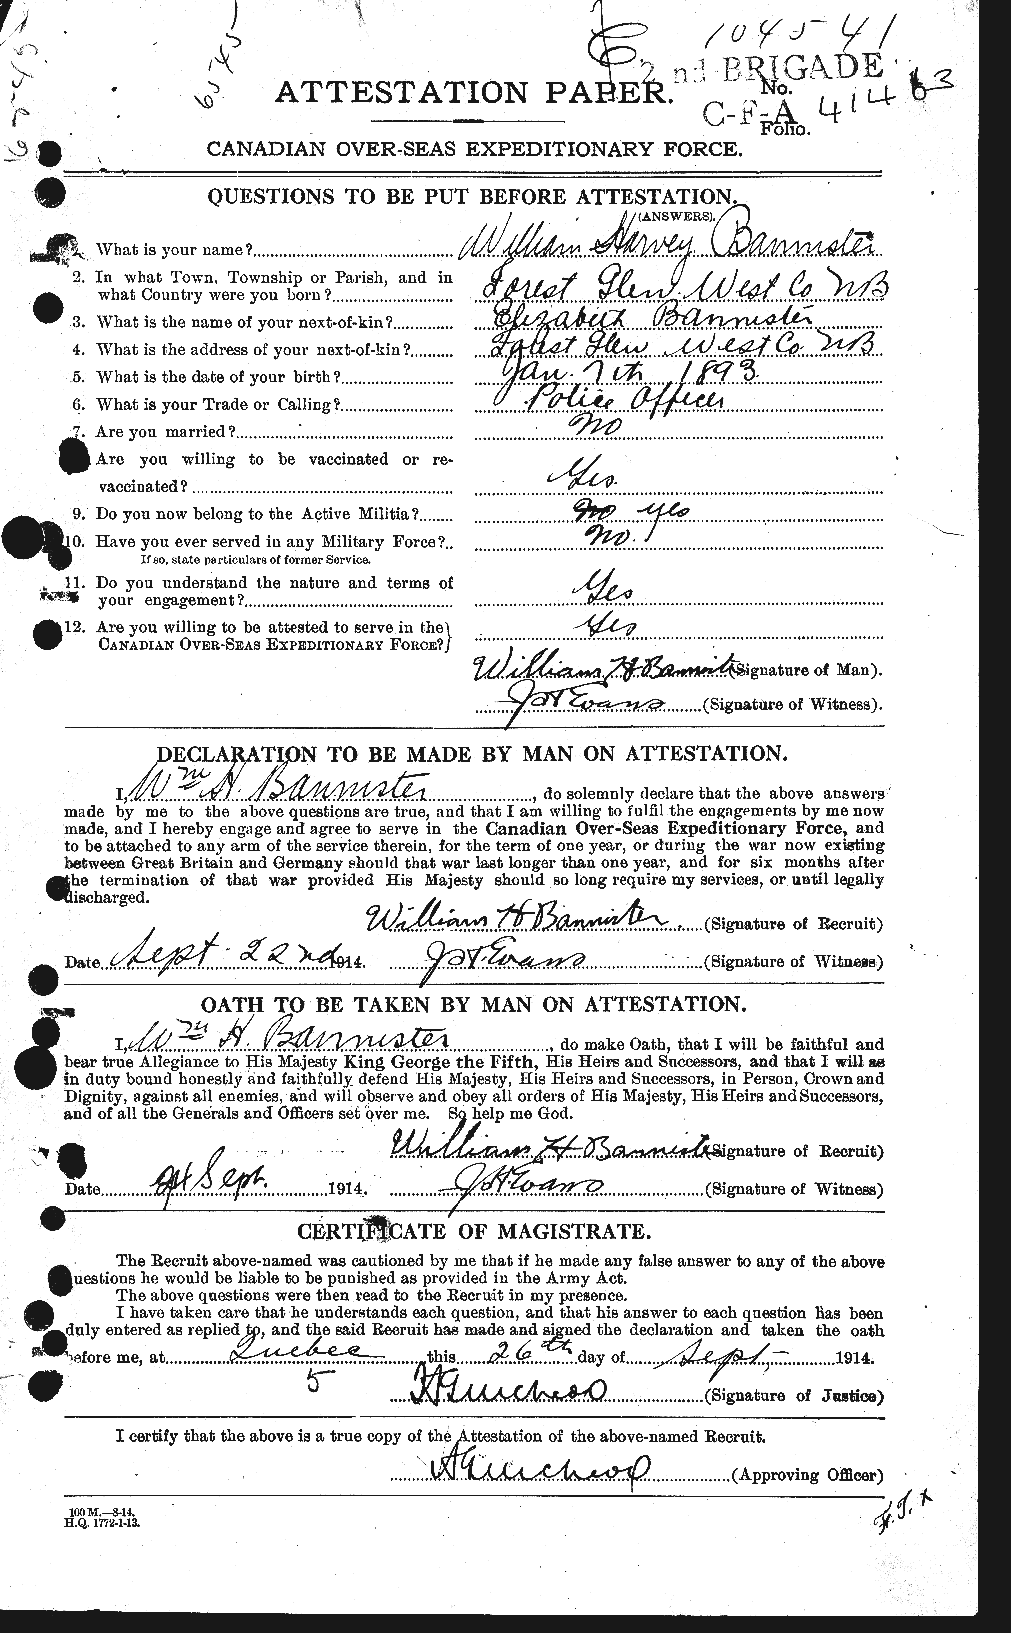 Personnel Records of the First World War - CEF 224751a